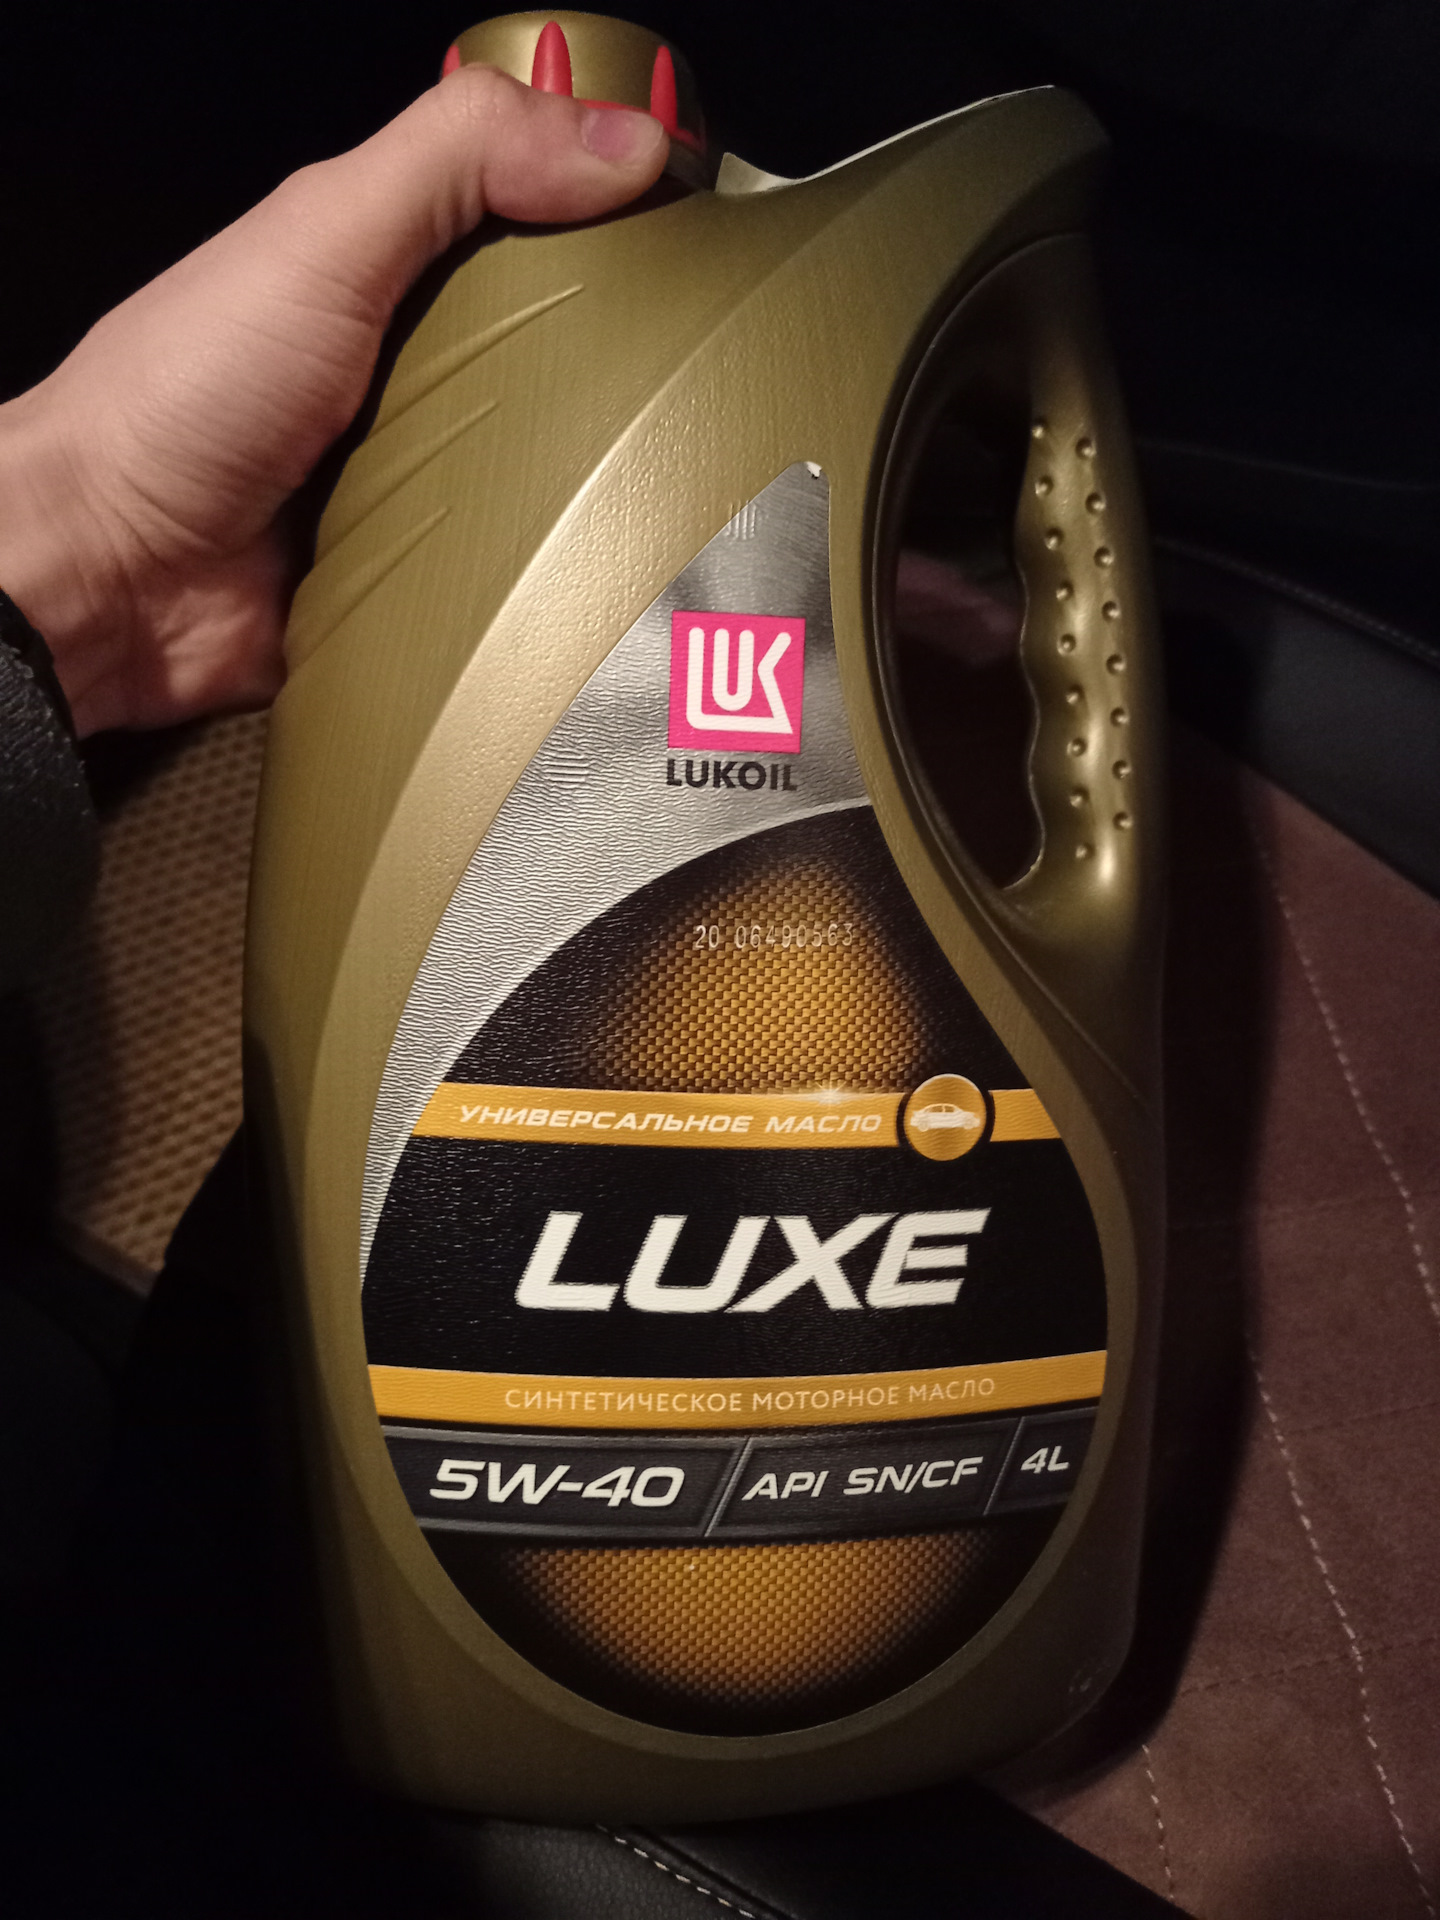 Тест масла лукойл 5w30. Лукойл Люкс 5w40. Lukoil Luxe 5w40 синтетика. Лукойл Люкс 5w40 полусинтетика. Лукойл Люкс синтетическое 5w-40.